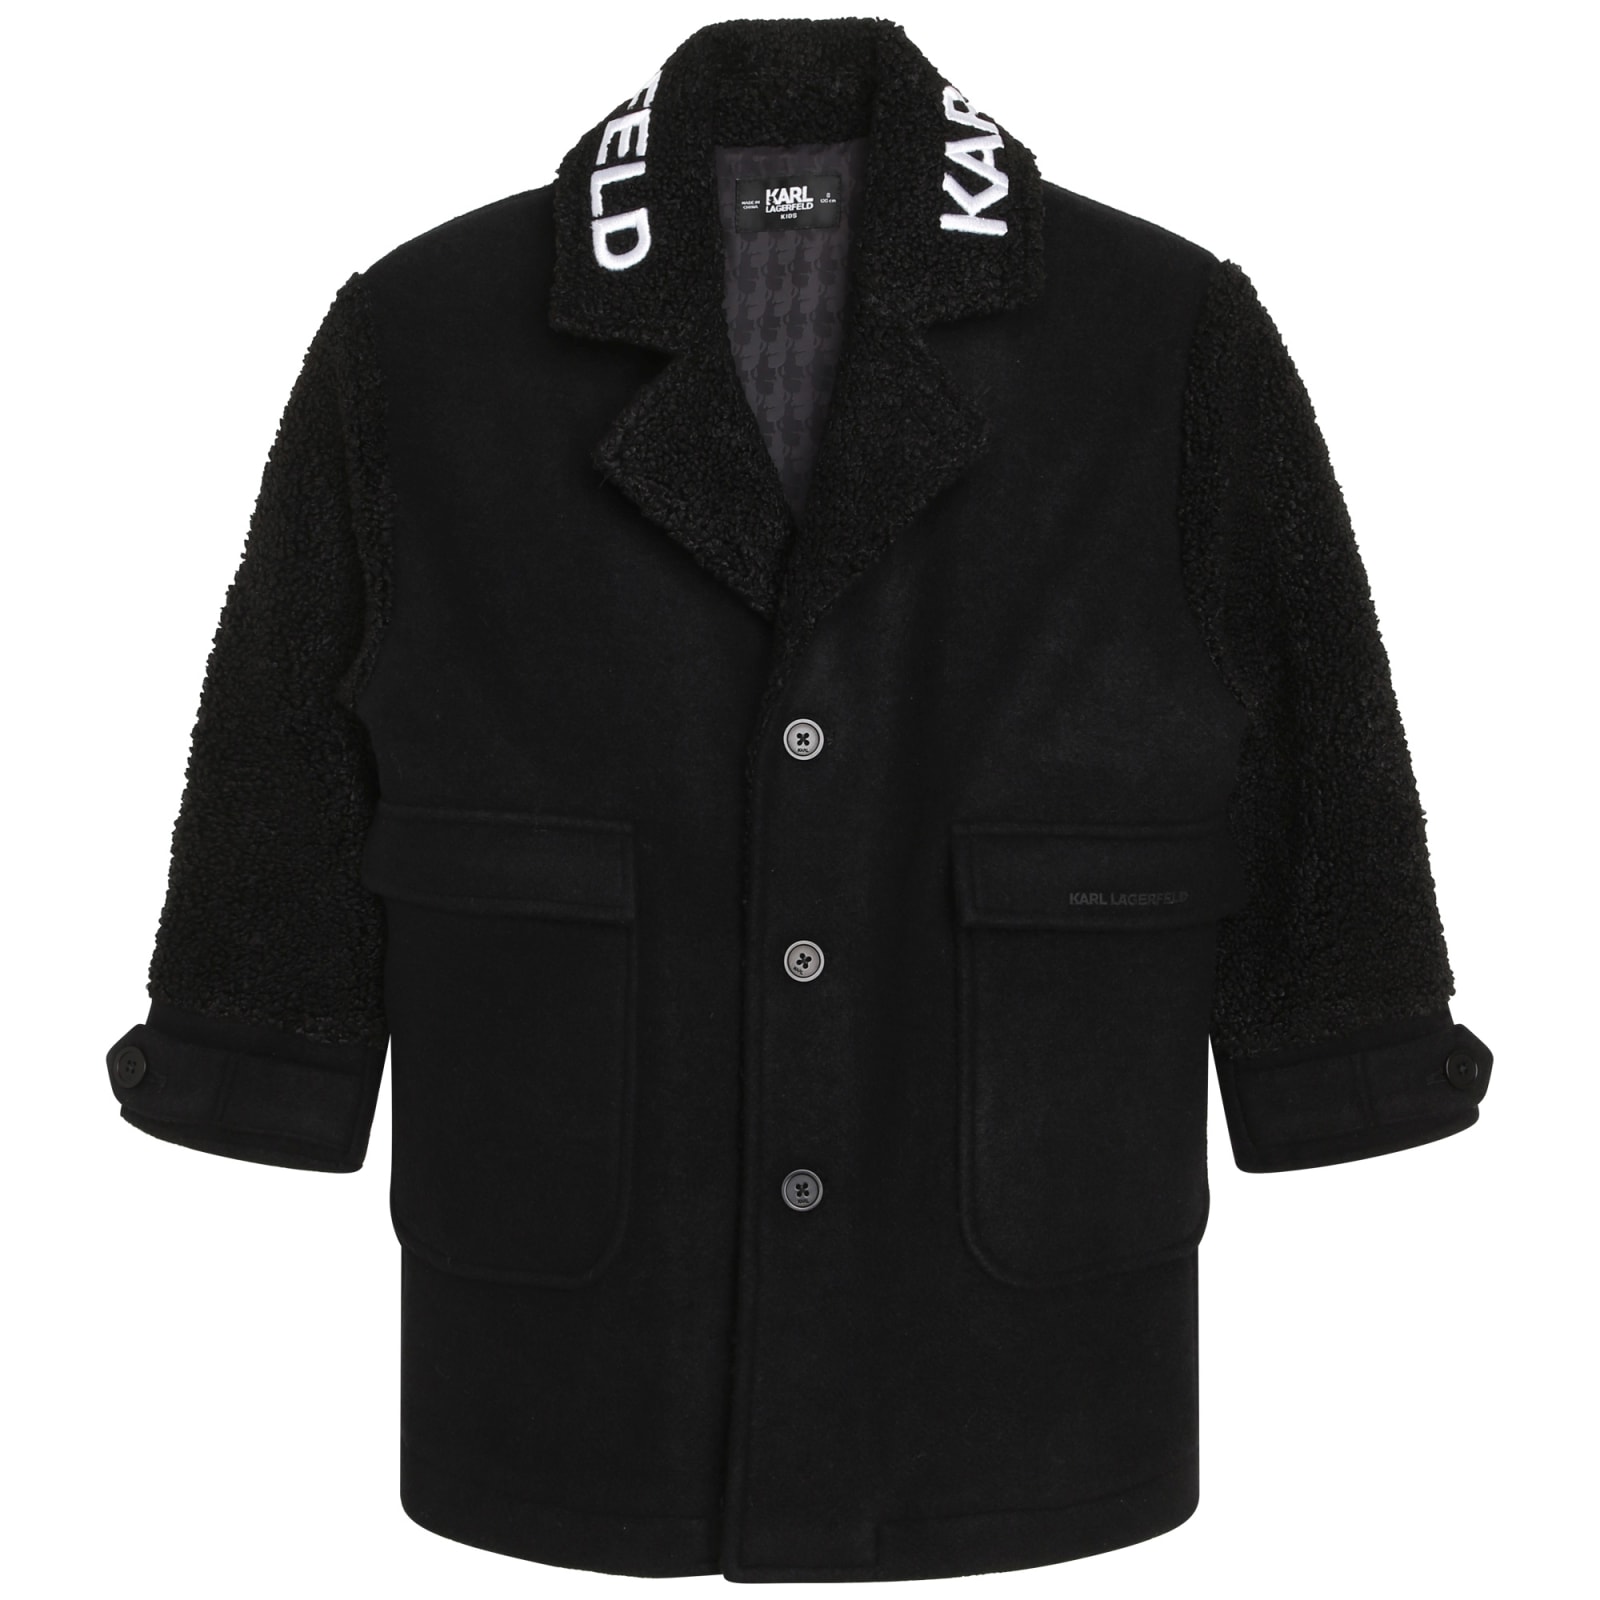 KARL LAGERFELD SINGLE-BREASTED COAT WITH LOGO